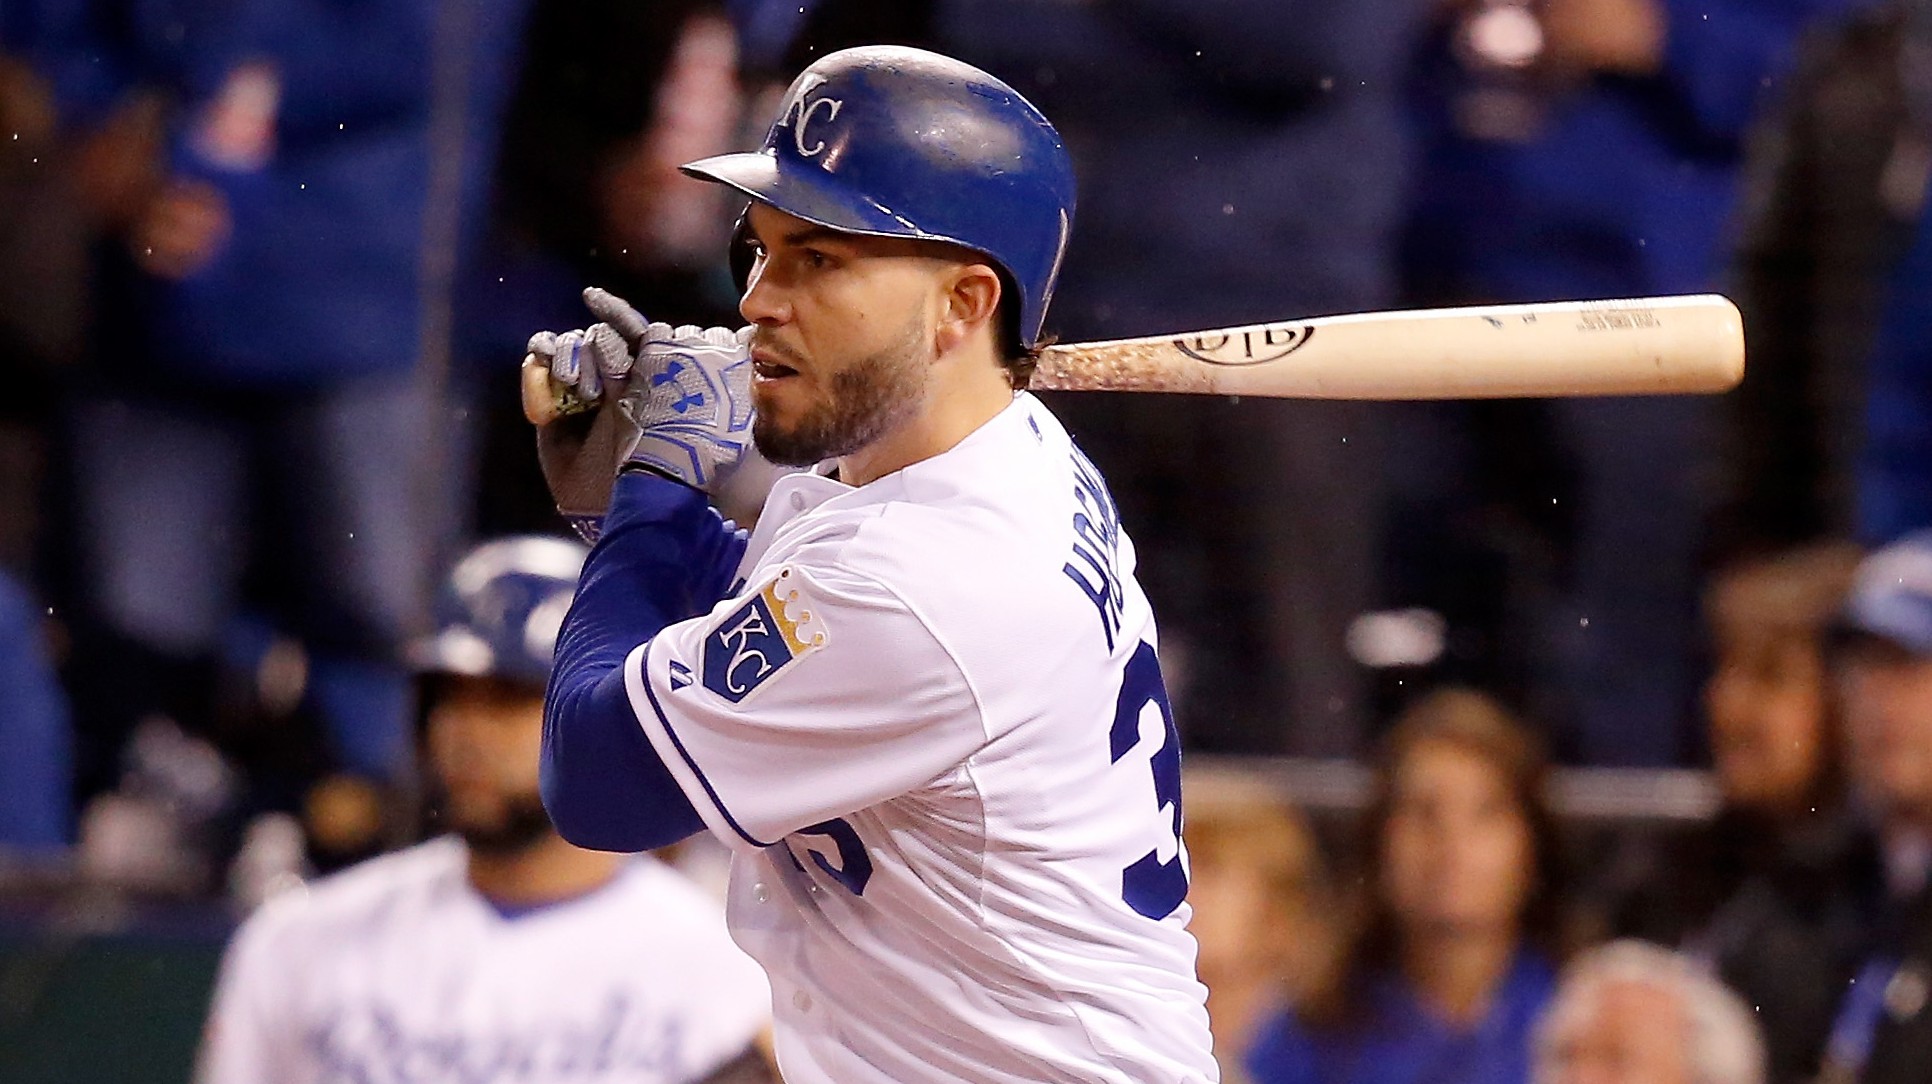 2015 World Series: Eric Hosmer gives the Royals the lead in Game 2 